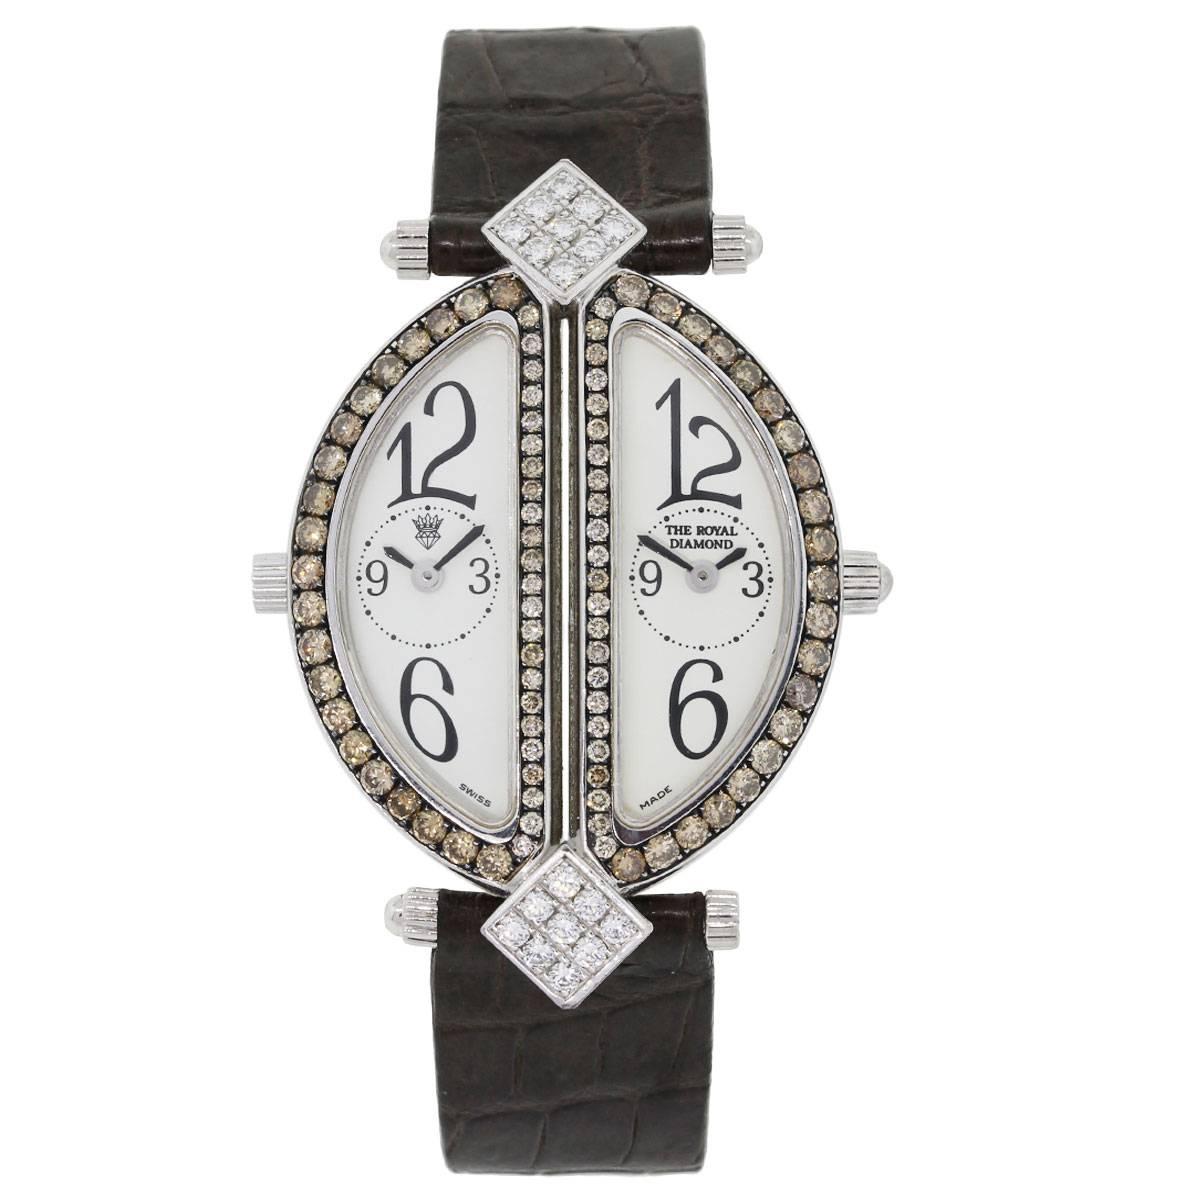 Brand: The Royal Diamond
MPN: BA812
Model: Double
Case Material: 18k white gold
Case Diameter: 30mm x 44mm
Crystal: Sapphire crystal
Bezel: Diamond bezel. Diamonds are cognac in color and VS in clarity. White diamonds are G/H in color and VS in